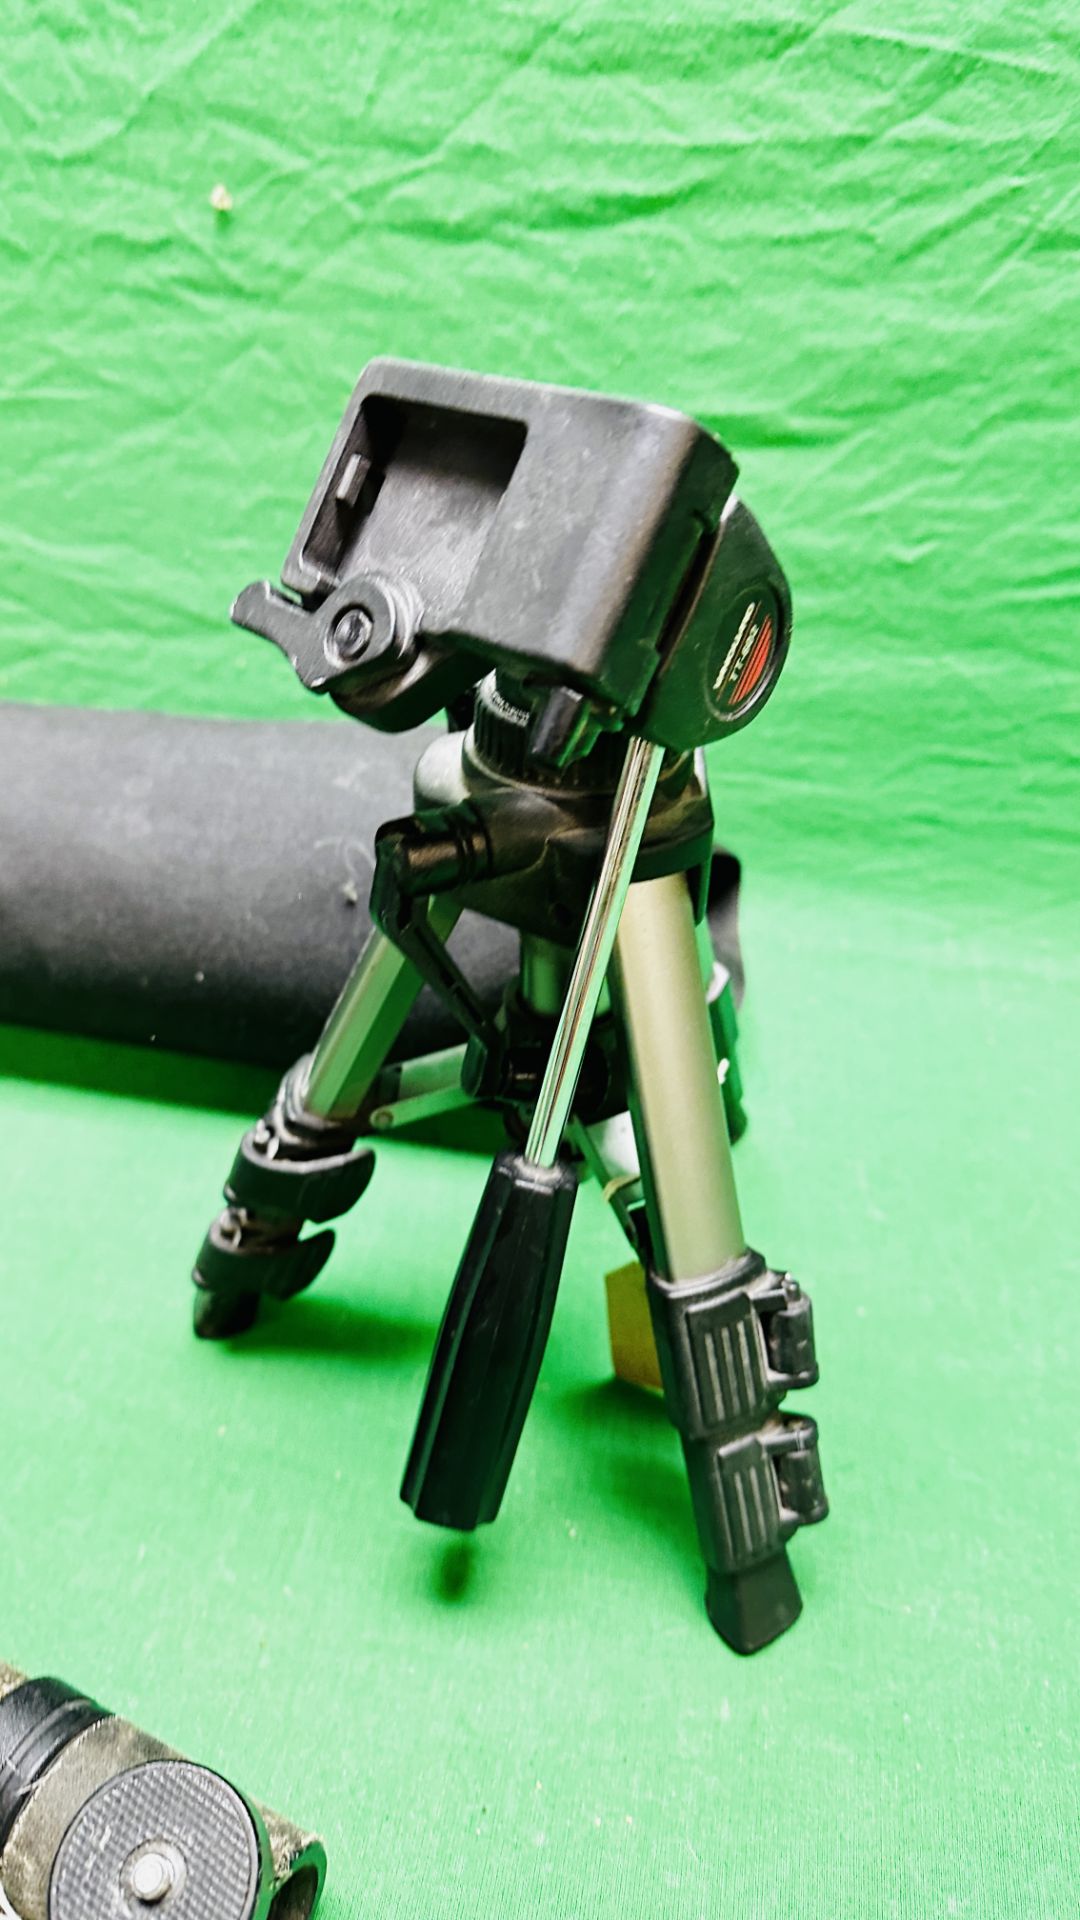 A MIRADOR SPOTTING SCOPE COMPLETE WITH TRIPOD, CARRY CASE AND MONOPOD STICK. - Image 8 of 8